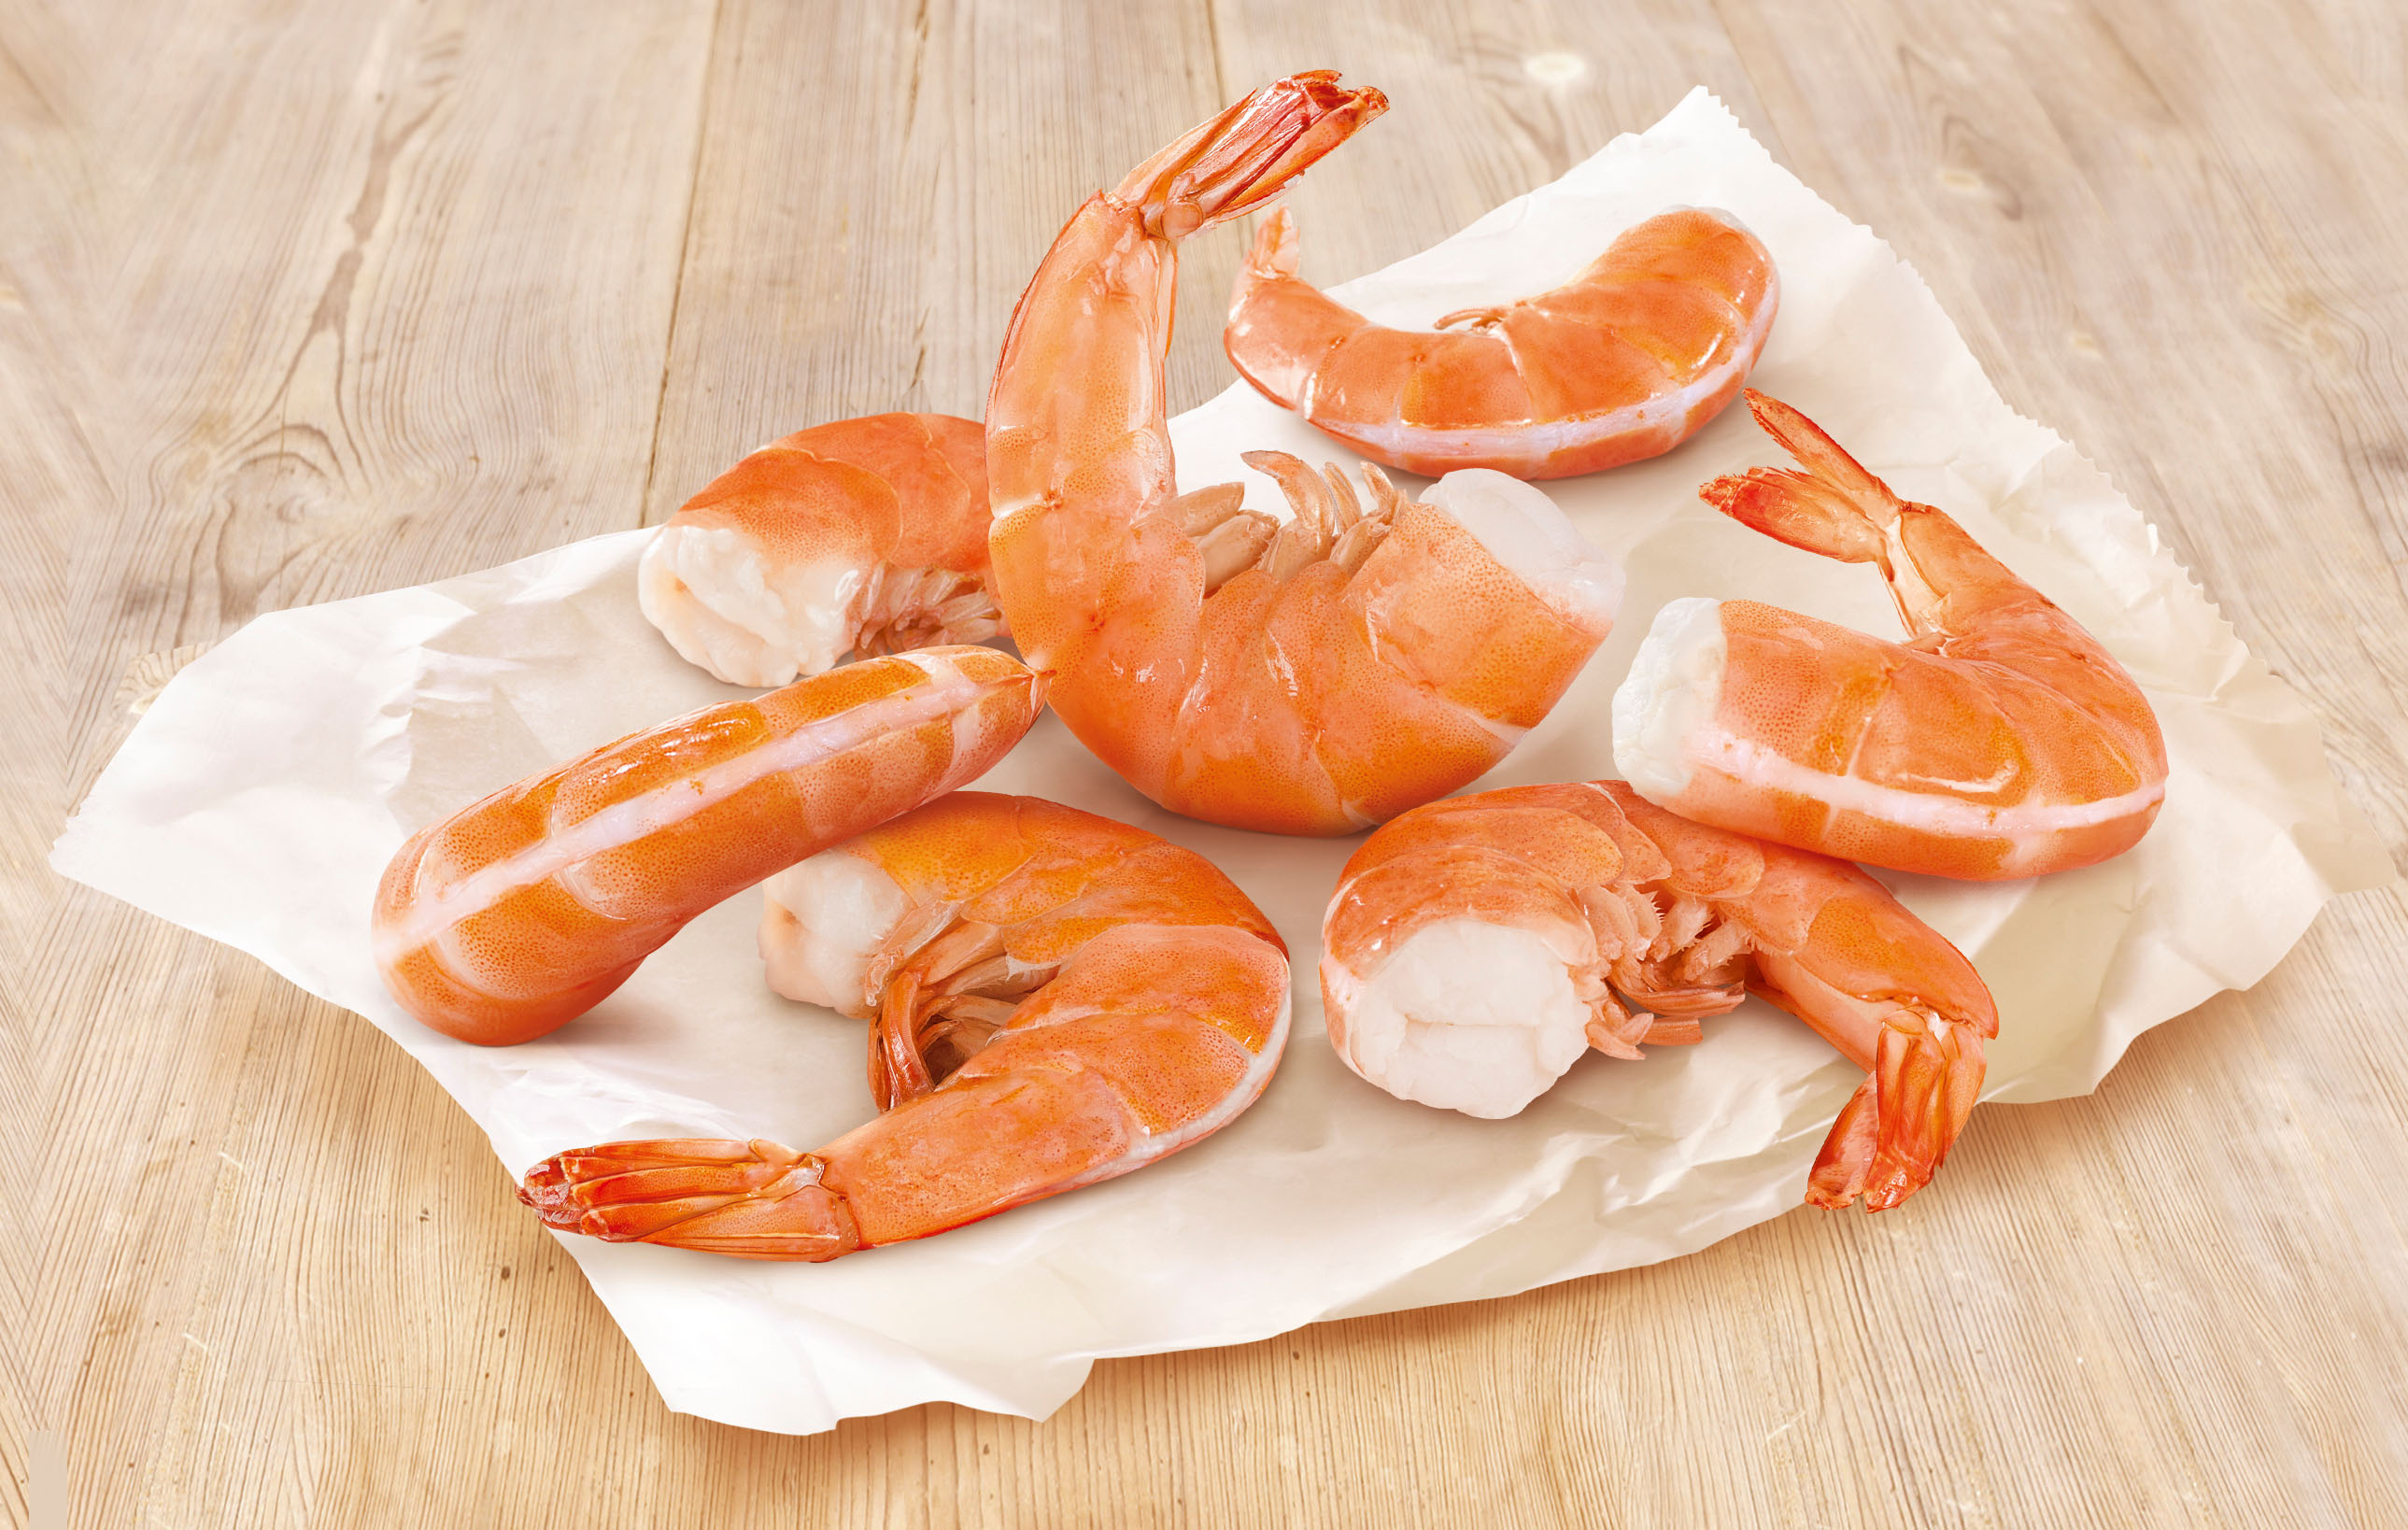 Seafood: An important source of protein in many diets around the world, Crustacean. 2580x1640 HD Wallpaper.